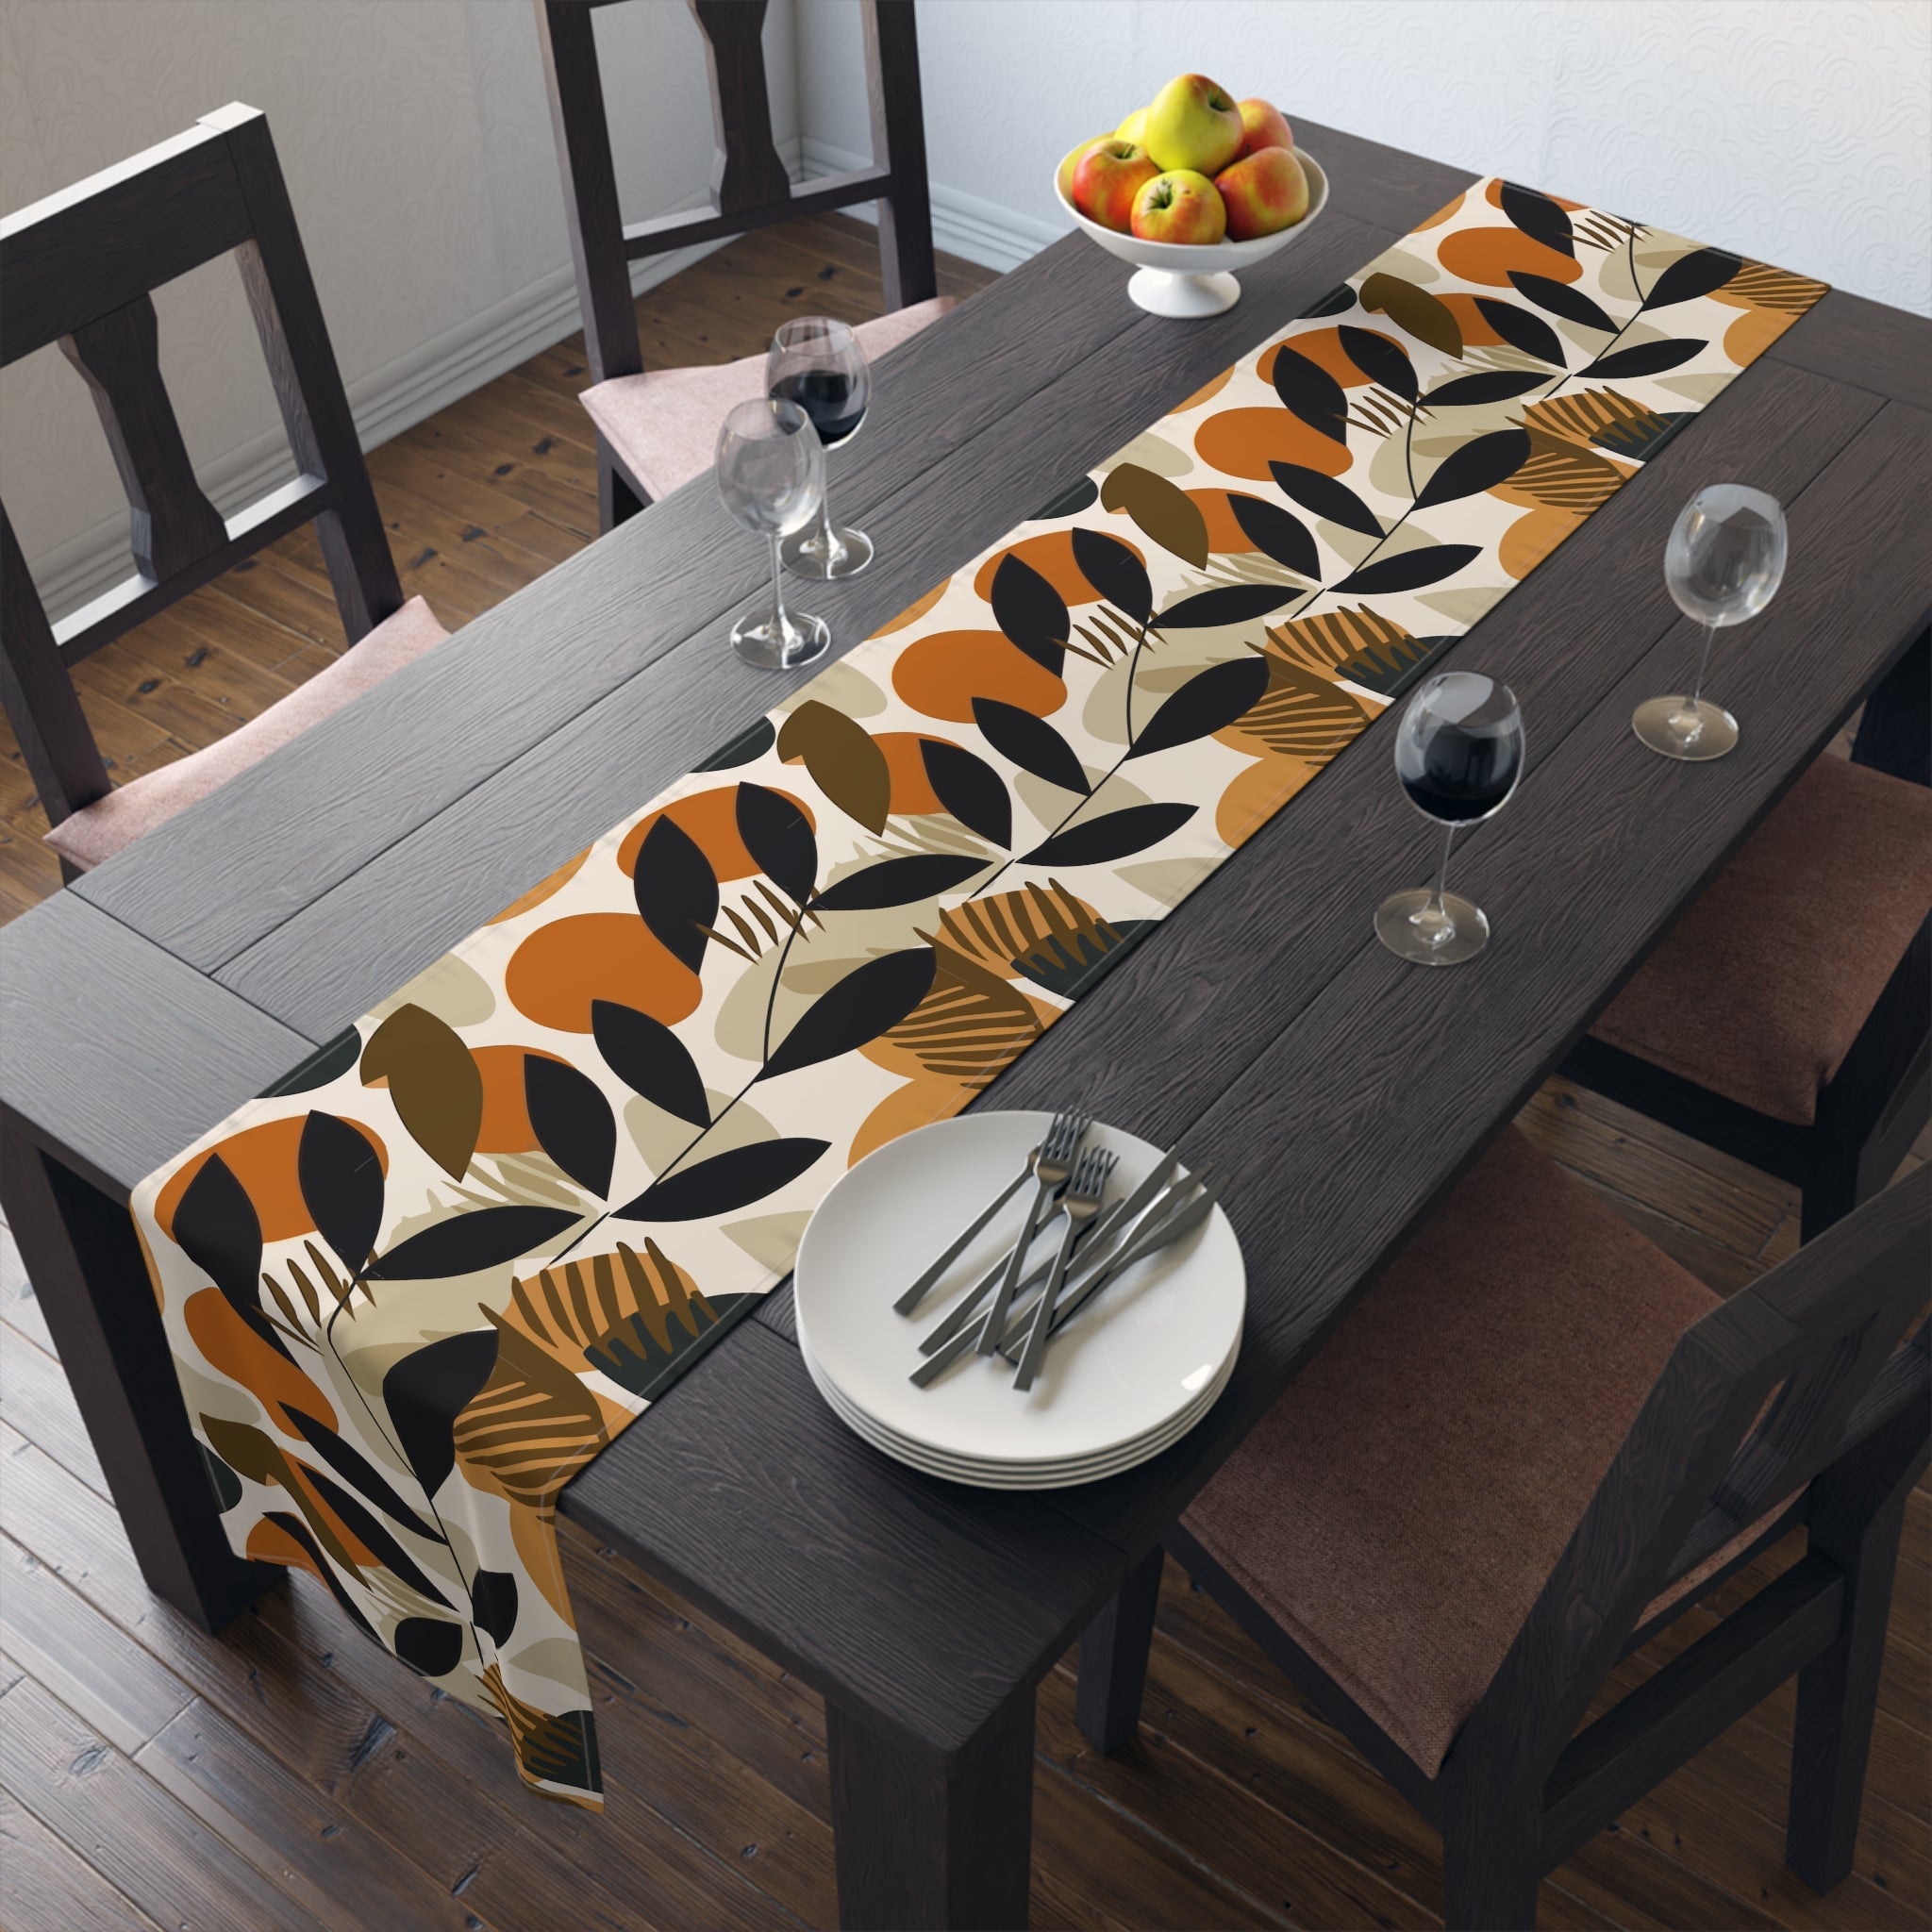 Leafy Harmony: The Earthy Table Runner - My Store